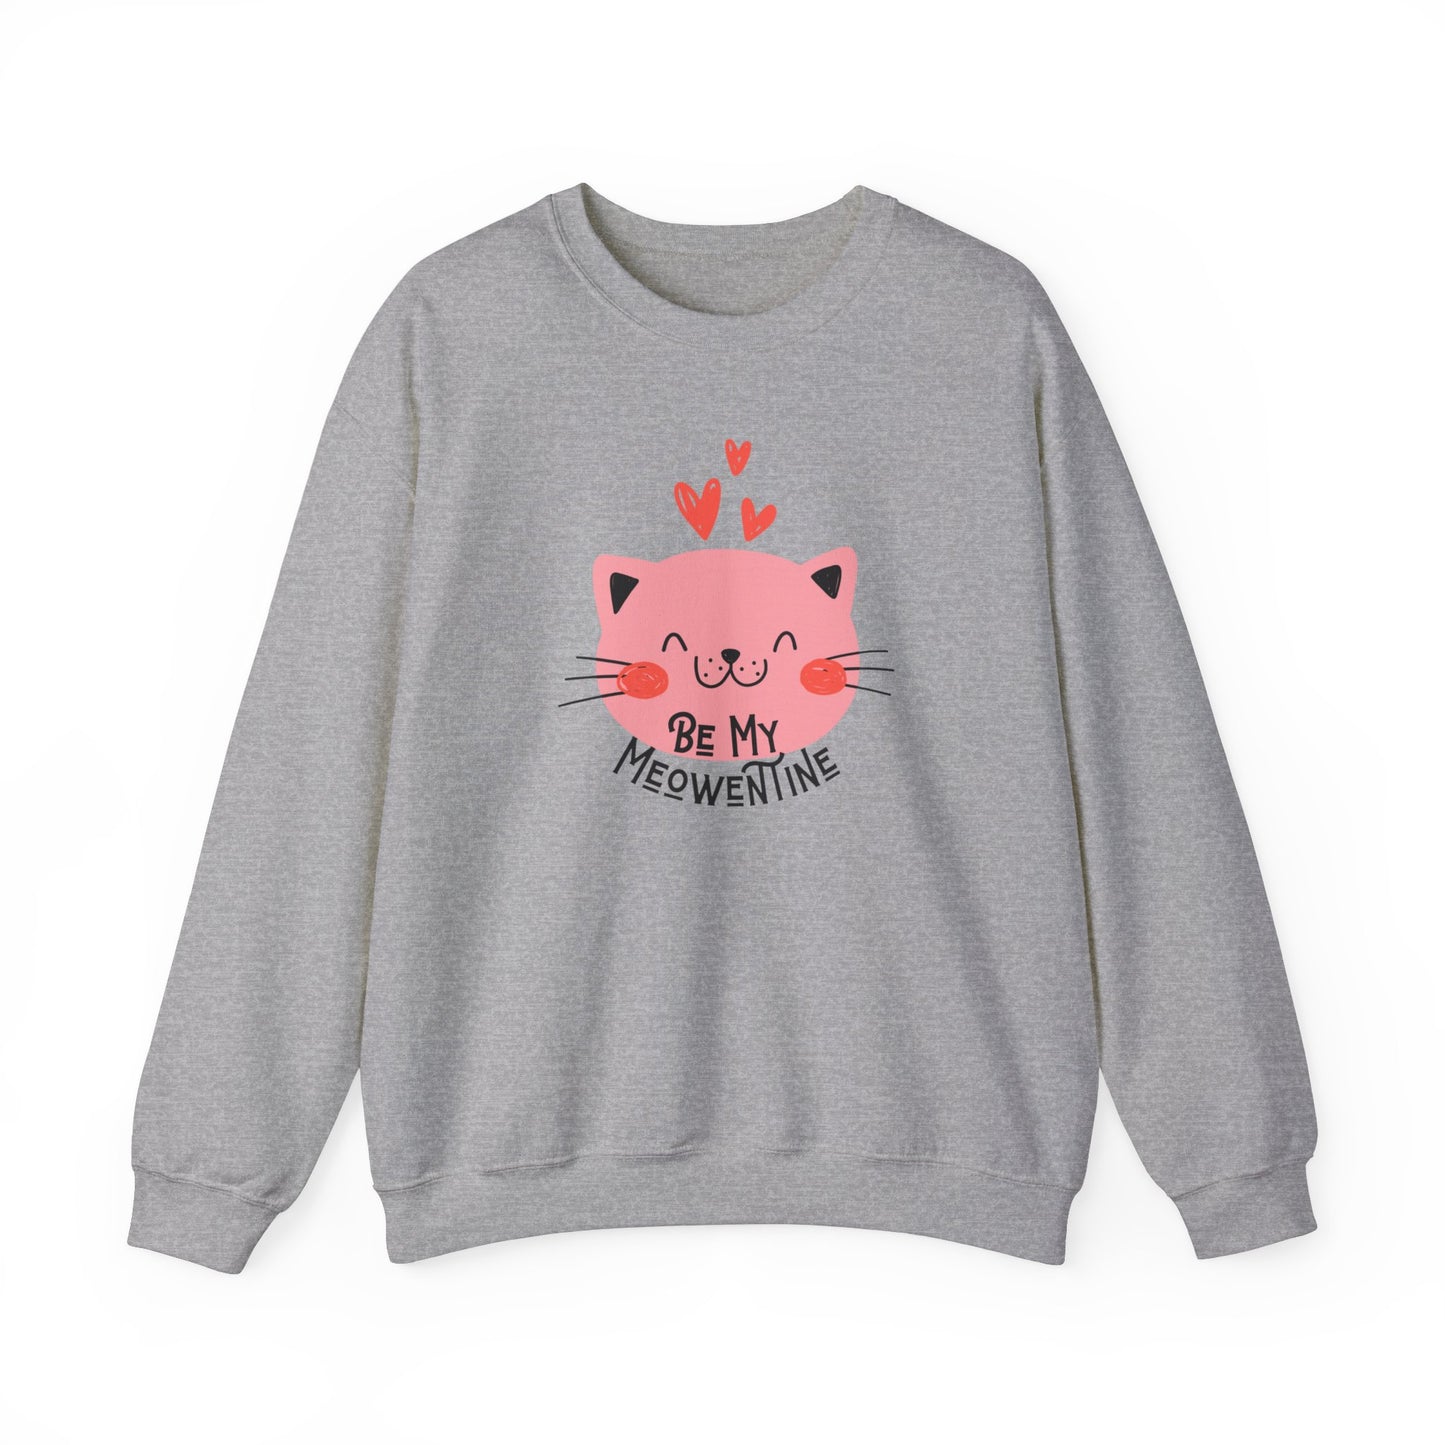 Be My Meowentine Valentines Day Unisex Heavy Blend Crewneck Sweatshirt, Cat Valentines Shirt, Gift for Her or Him for Valentines Day